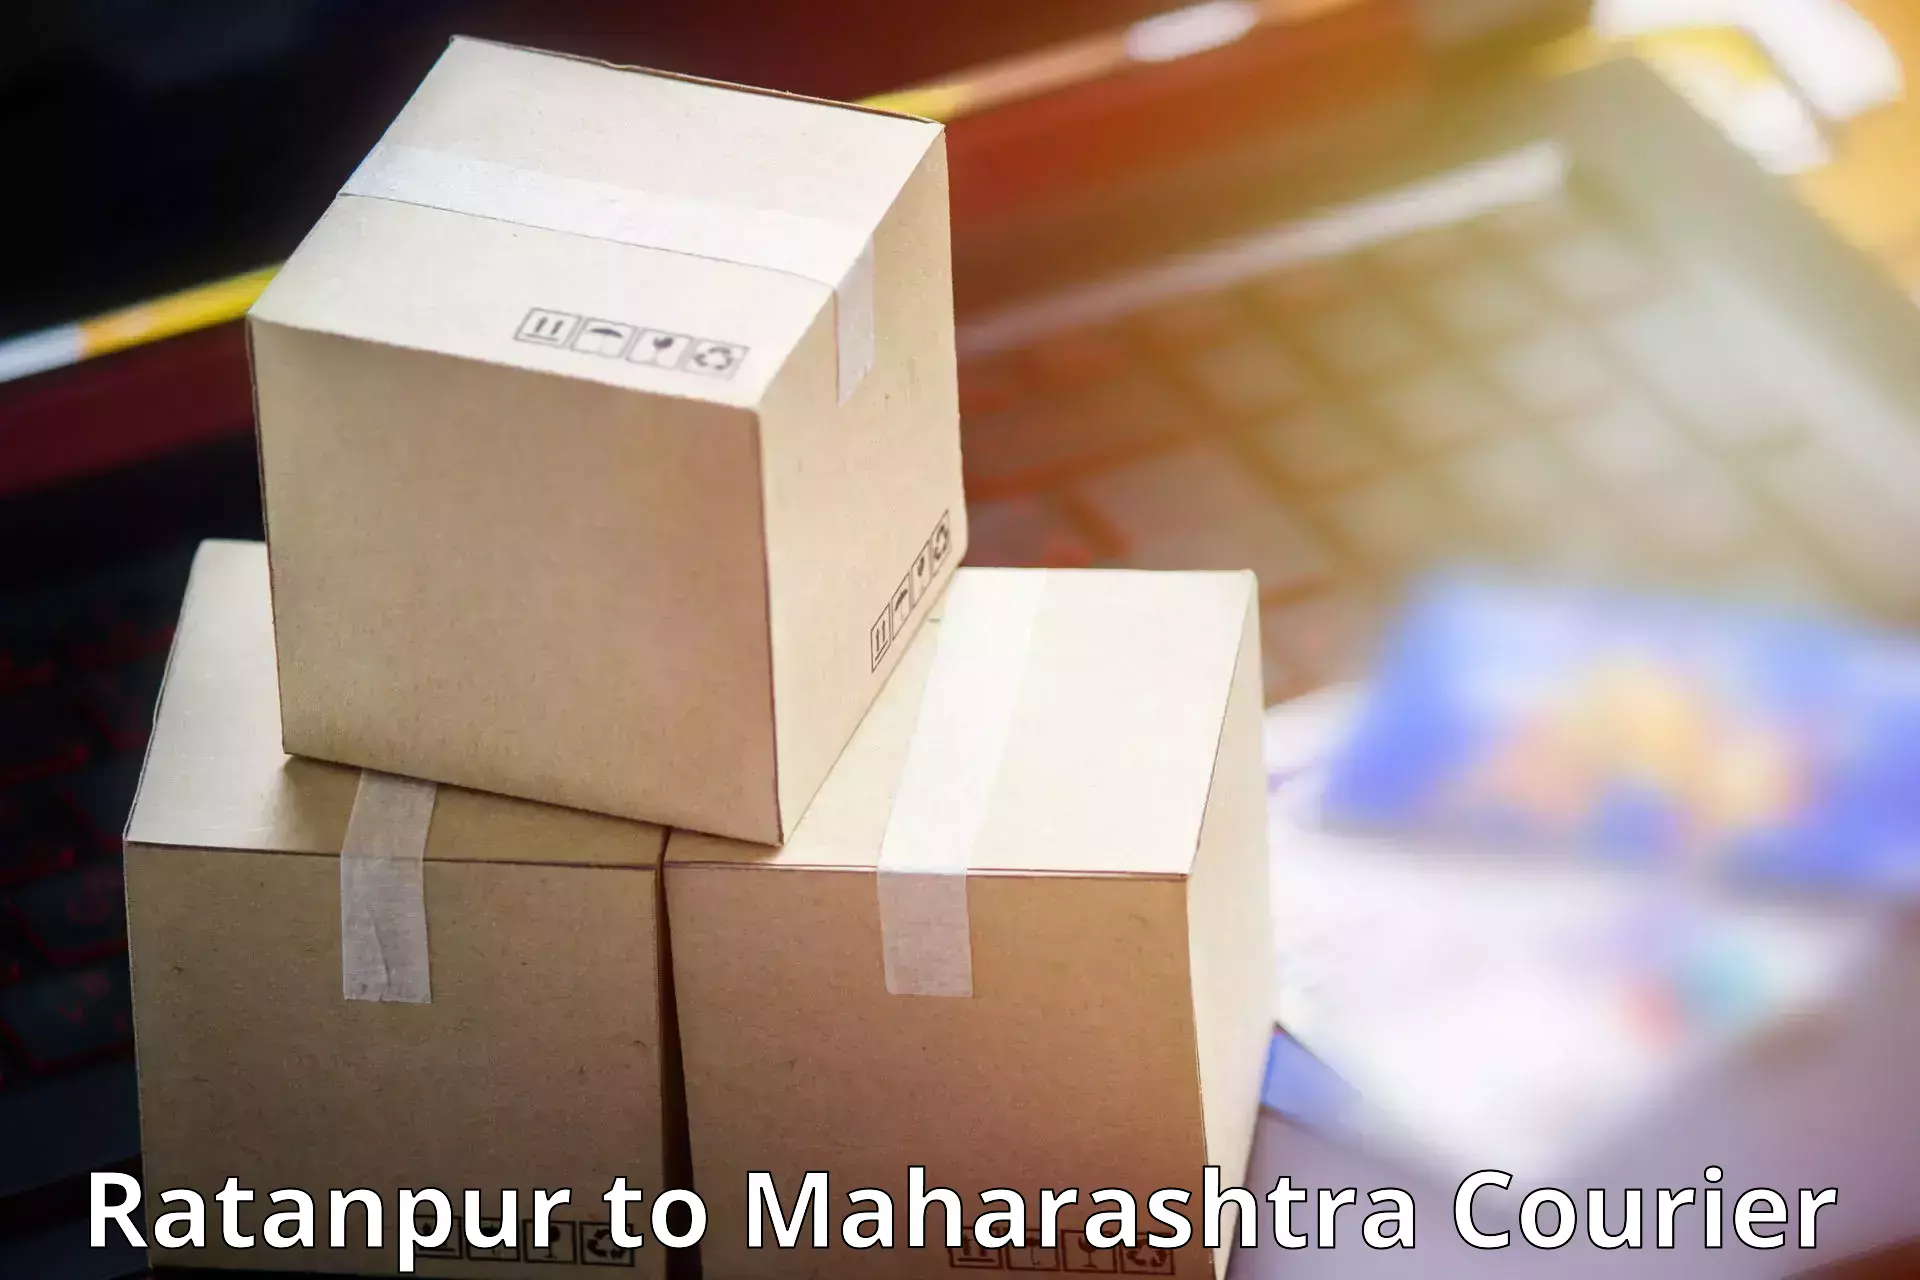 24-hour courier service Ratanpur to Bhokar